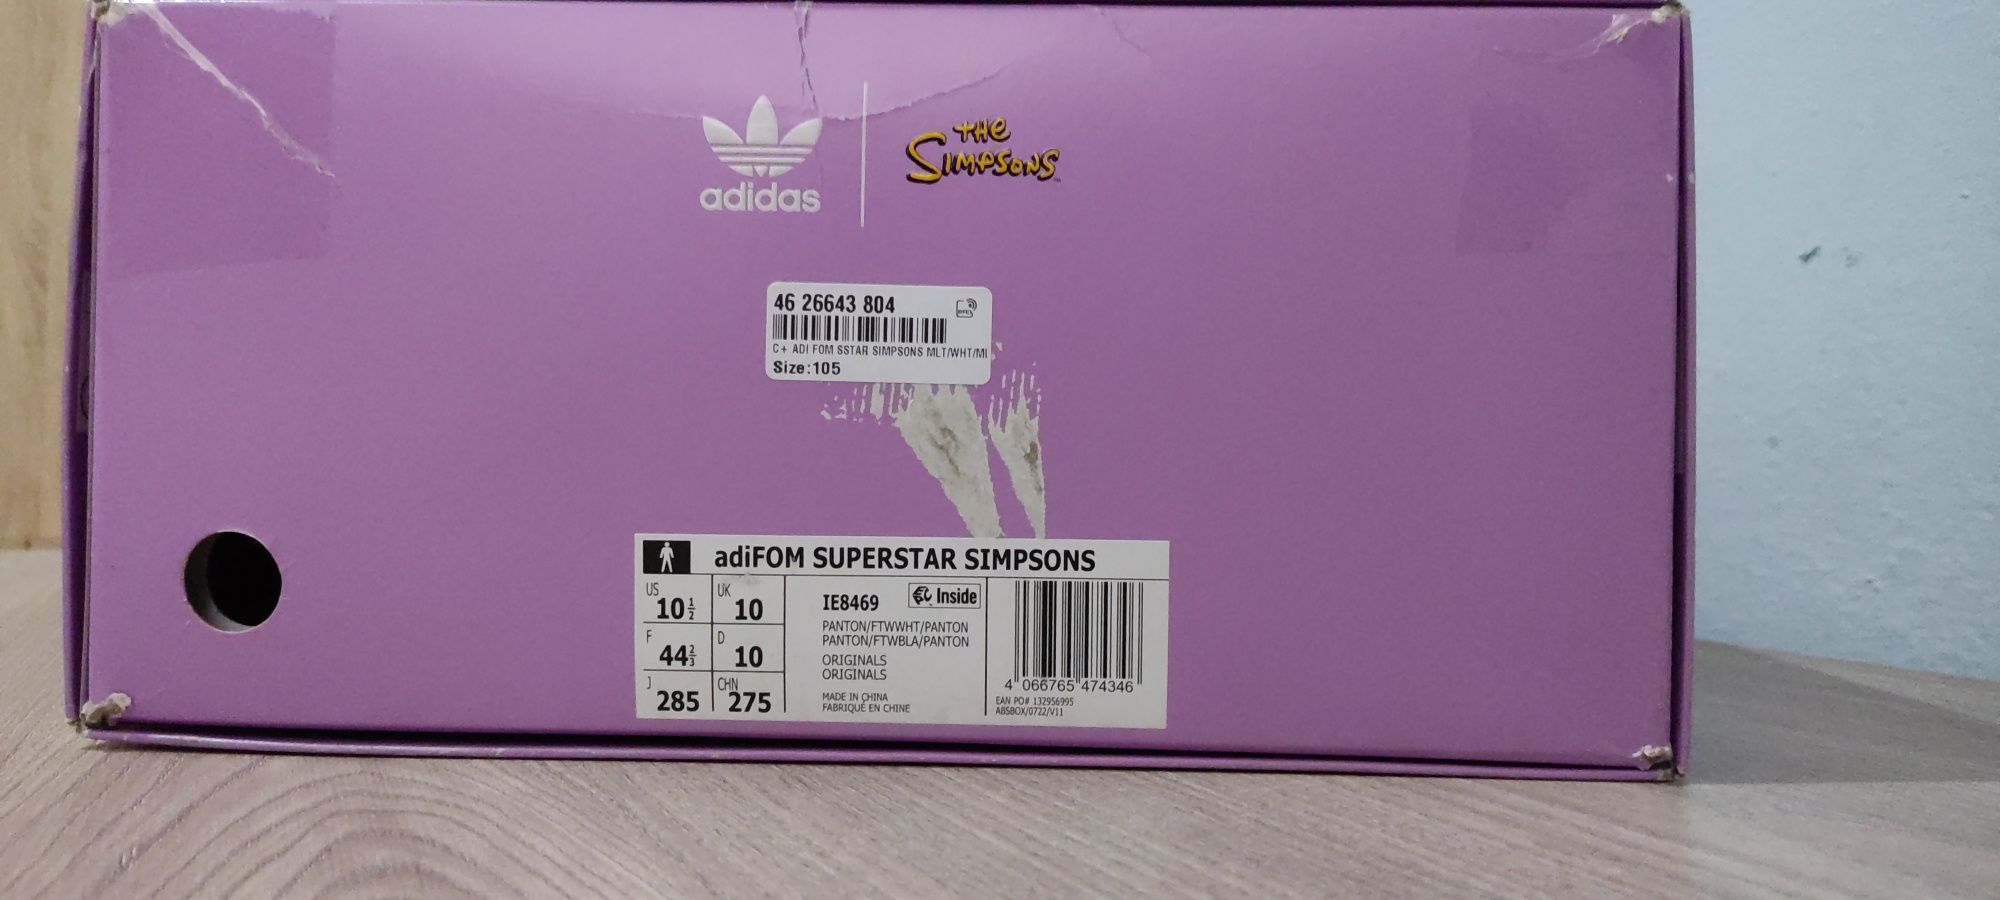 Adidas The Simpsons x adiFOM Superstar Clouds 44 2/3